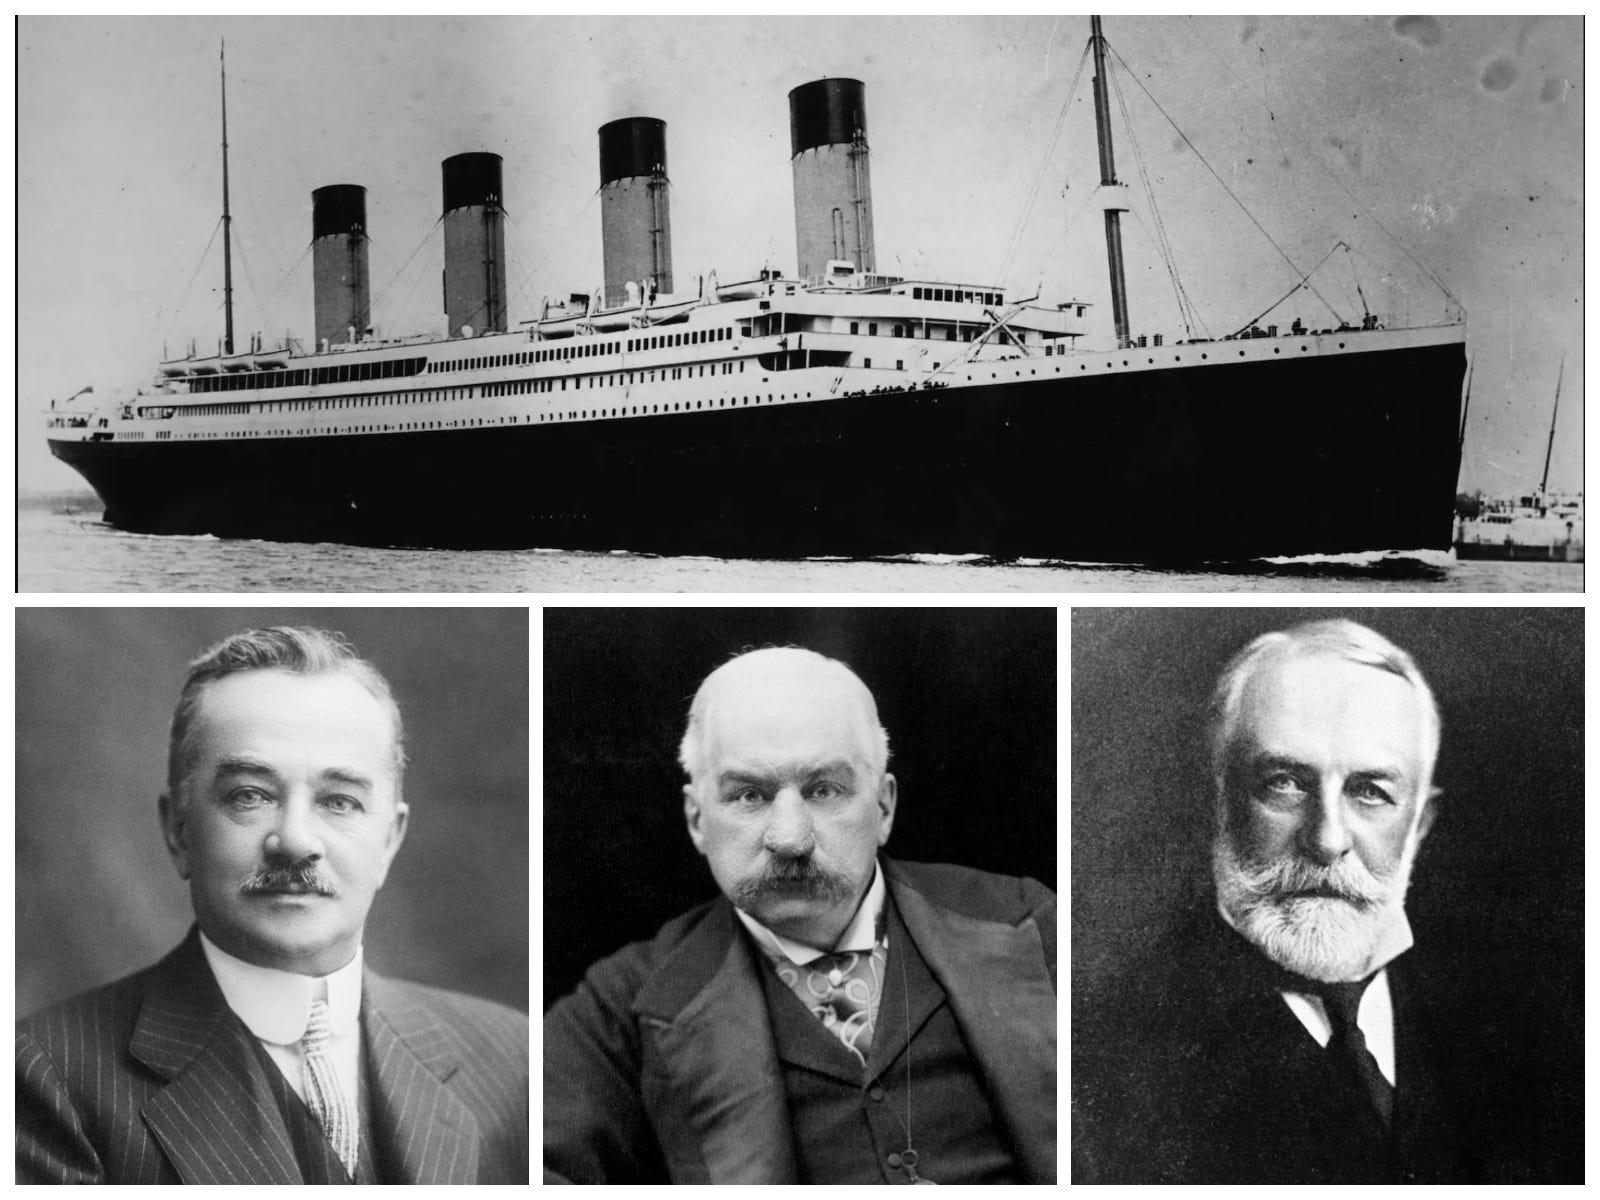 <ul class="summary-list"> <li>As <a href="https://www.insider.com/titanic-secrets-facts-2018-4">the Titanic was the height of luxury</a> in 1912, some celebrities had tickets for its maiden voyage.</li> <li>But not all of them ended up boarding the ship.</li> <li>J. Pierpont Morgan and Milton Hershey were among those who missed the disaster.</li> </ul><p>The sinking of the Titanic in April 1912 still captivates us today, with numerous books, <a href="https://www.insider.com/titanic-fun-facts-movie-2018-11">a multi-billion-dollar movie</a>, <a href="https://www.insider.com/titanic-museum-missouri-photos-exhibits-tickets-2023-6">museums</a>, and, controversially, <a href="https://www.insider.com/titanic-international-society-time-to-consider-ending-human-trips-2023-6">tours to the site of the wreckage</a> available.</p><p>Interest around the ship led to another maritime tragedy in June 2023, when a submersible went missing on the way to the wreckage and was <a href="https://www.insider.com/what-happened-to-the-titanic-submersible-experts-explain-likely-scenarios-2023-6">eventually confirmed to have imploded</a>, killing all five people onboard. Stories have since emerged about people who were invited to take part in one of OceanGate's trips, <a href="https://people.com/stories-from-people-who-almost-dove-titan-submersible-7553204">but decided against it</a> — much like, over 100 years ago, how people were fascinated with who had <em>almost </em>been on the Titanic.</p><p>Here are seven notable figures who were supposed to sail on the Titanic's maiden voyage but didn't — and four well-known people who were booked to go on a future journey with the ship.</p><div class="read-original">Read the original article on <a href="https://www.insider.com/famous-people-who-missed-titanic-sinking-history-photos">Insider</a></div>